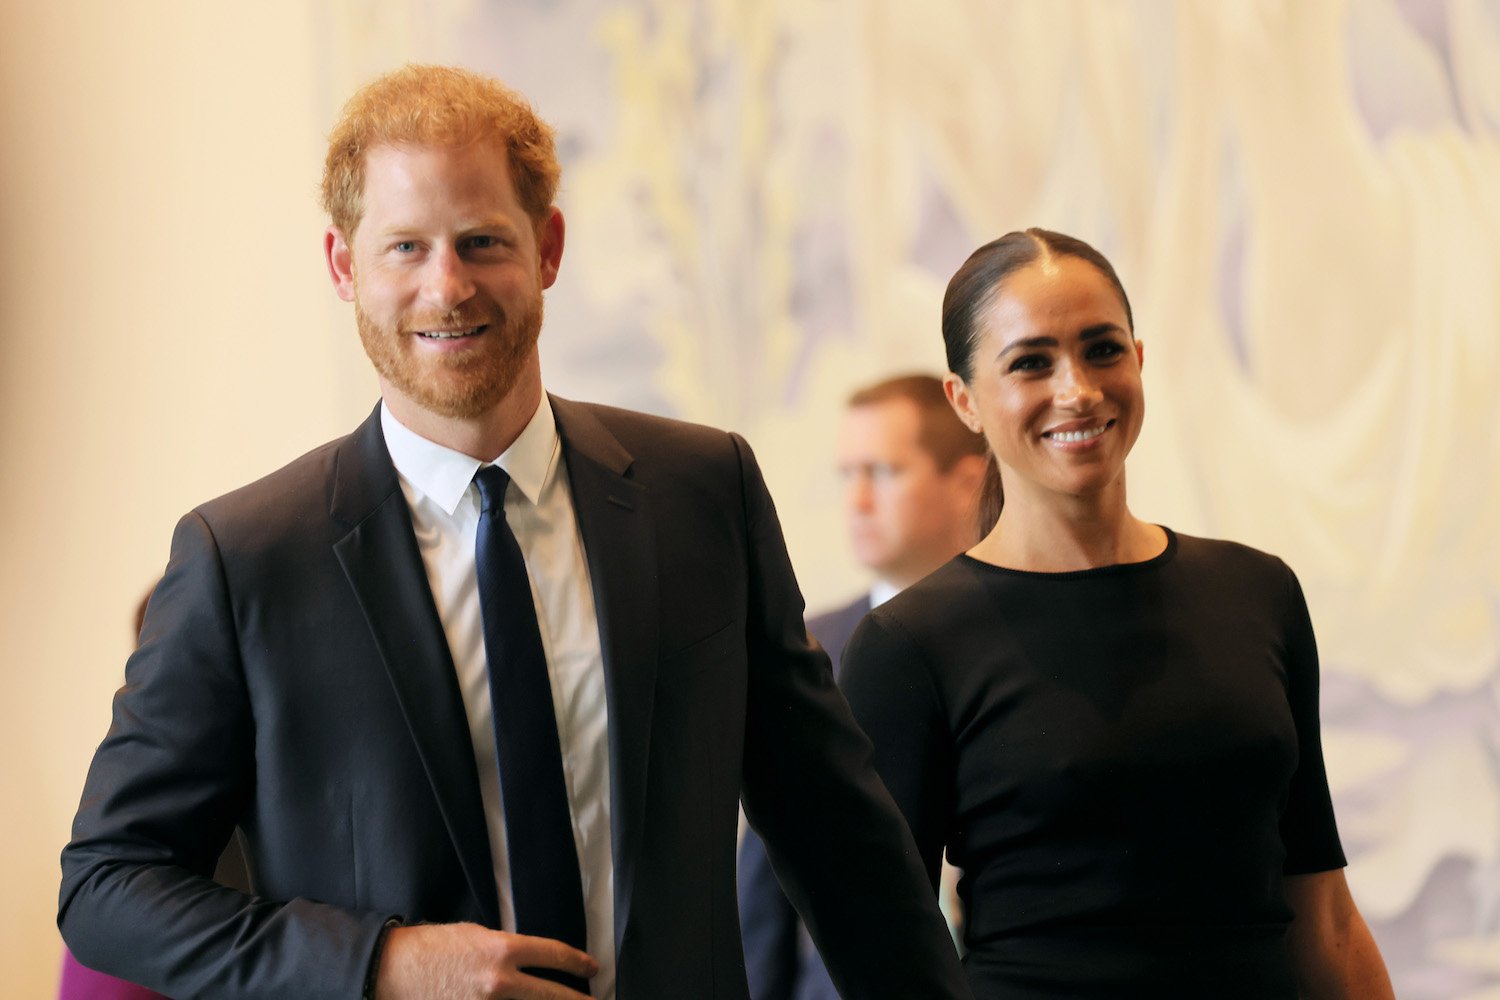 Prince Harry and Meghan Markle’s Staff Felt They ‘Were Played’ Because Meghan Had an Agenda, Author Says